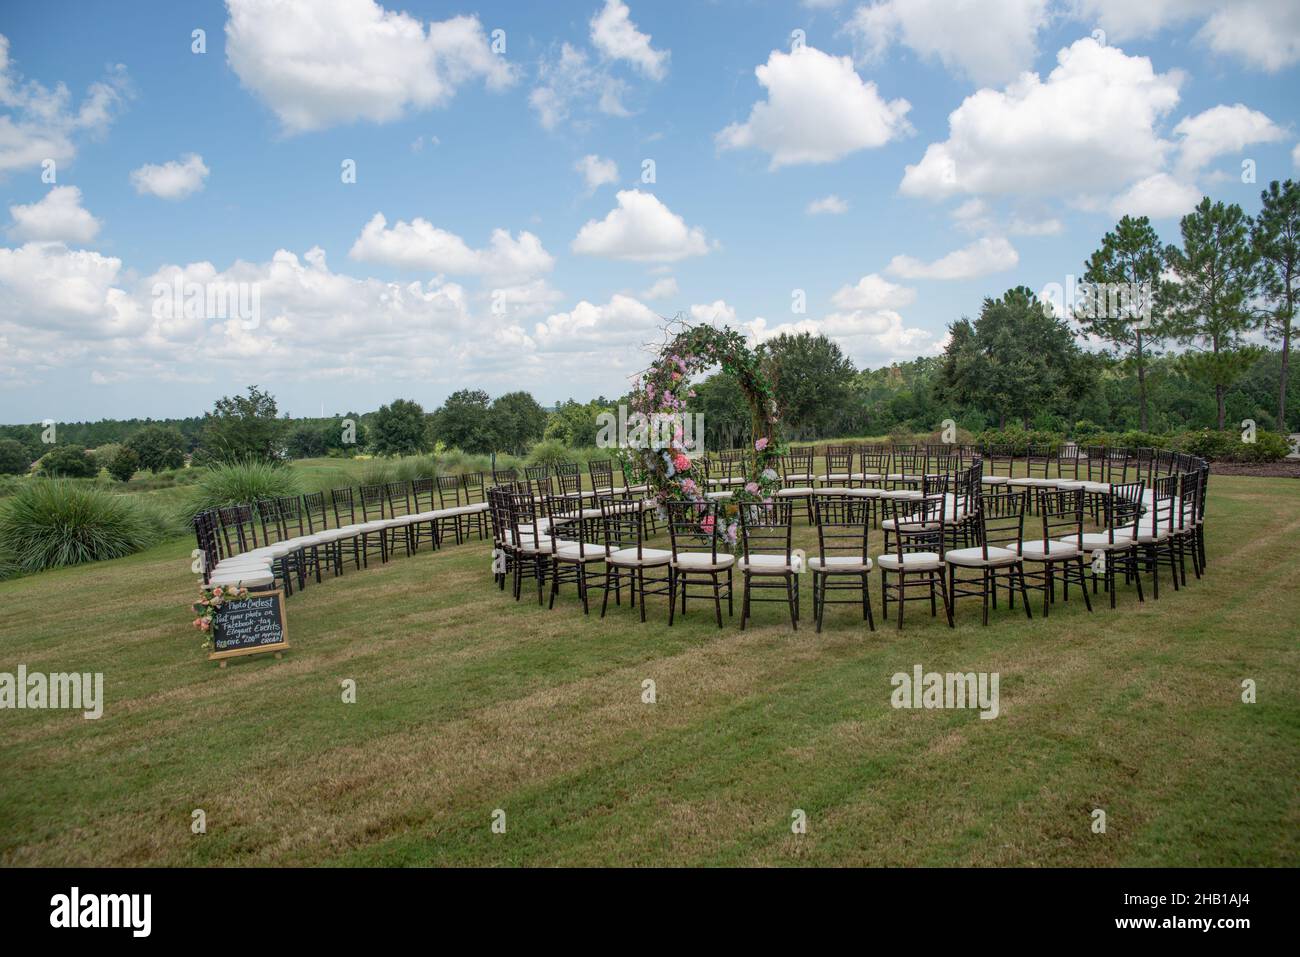 Unique round spiral chair pattern wedding ceremony setting at rolling hills countryside with brown chiavari chairs and white cushions Stock Photo